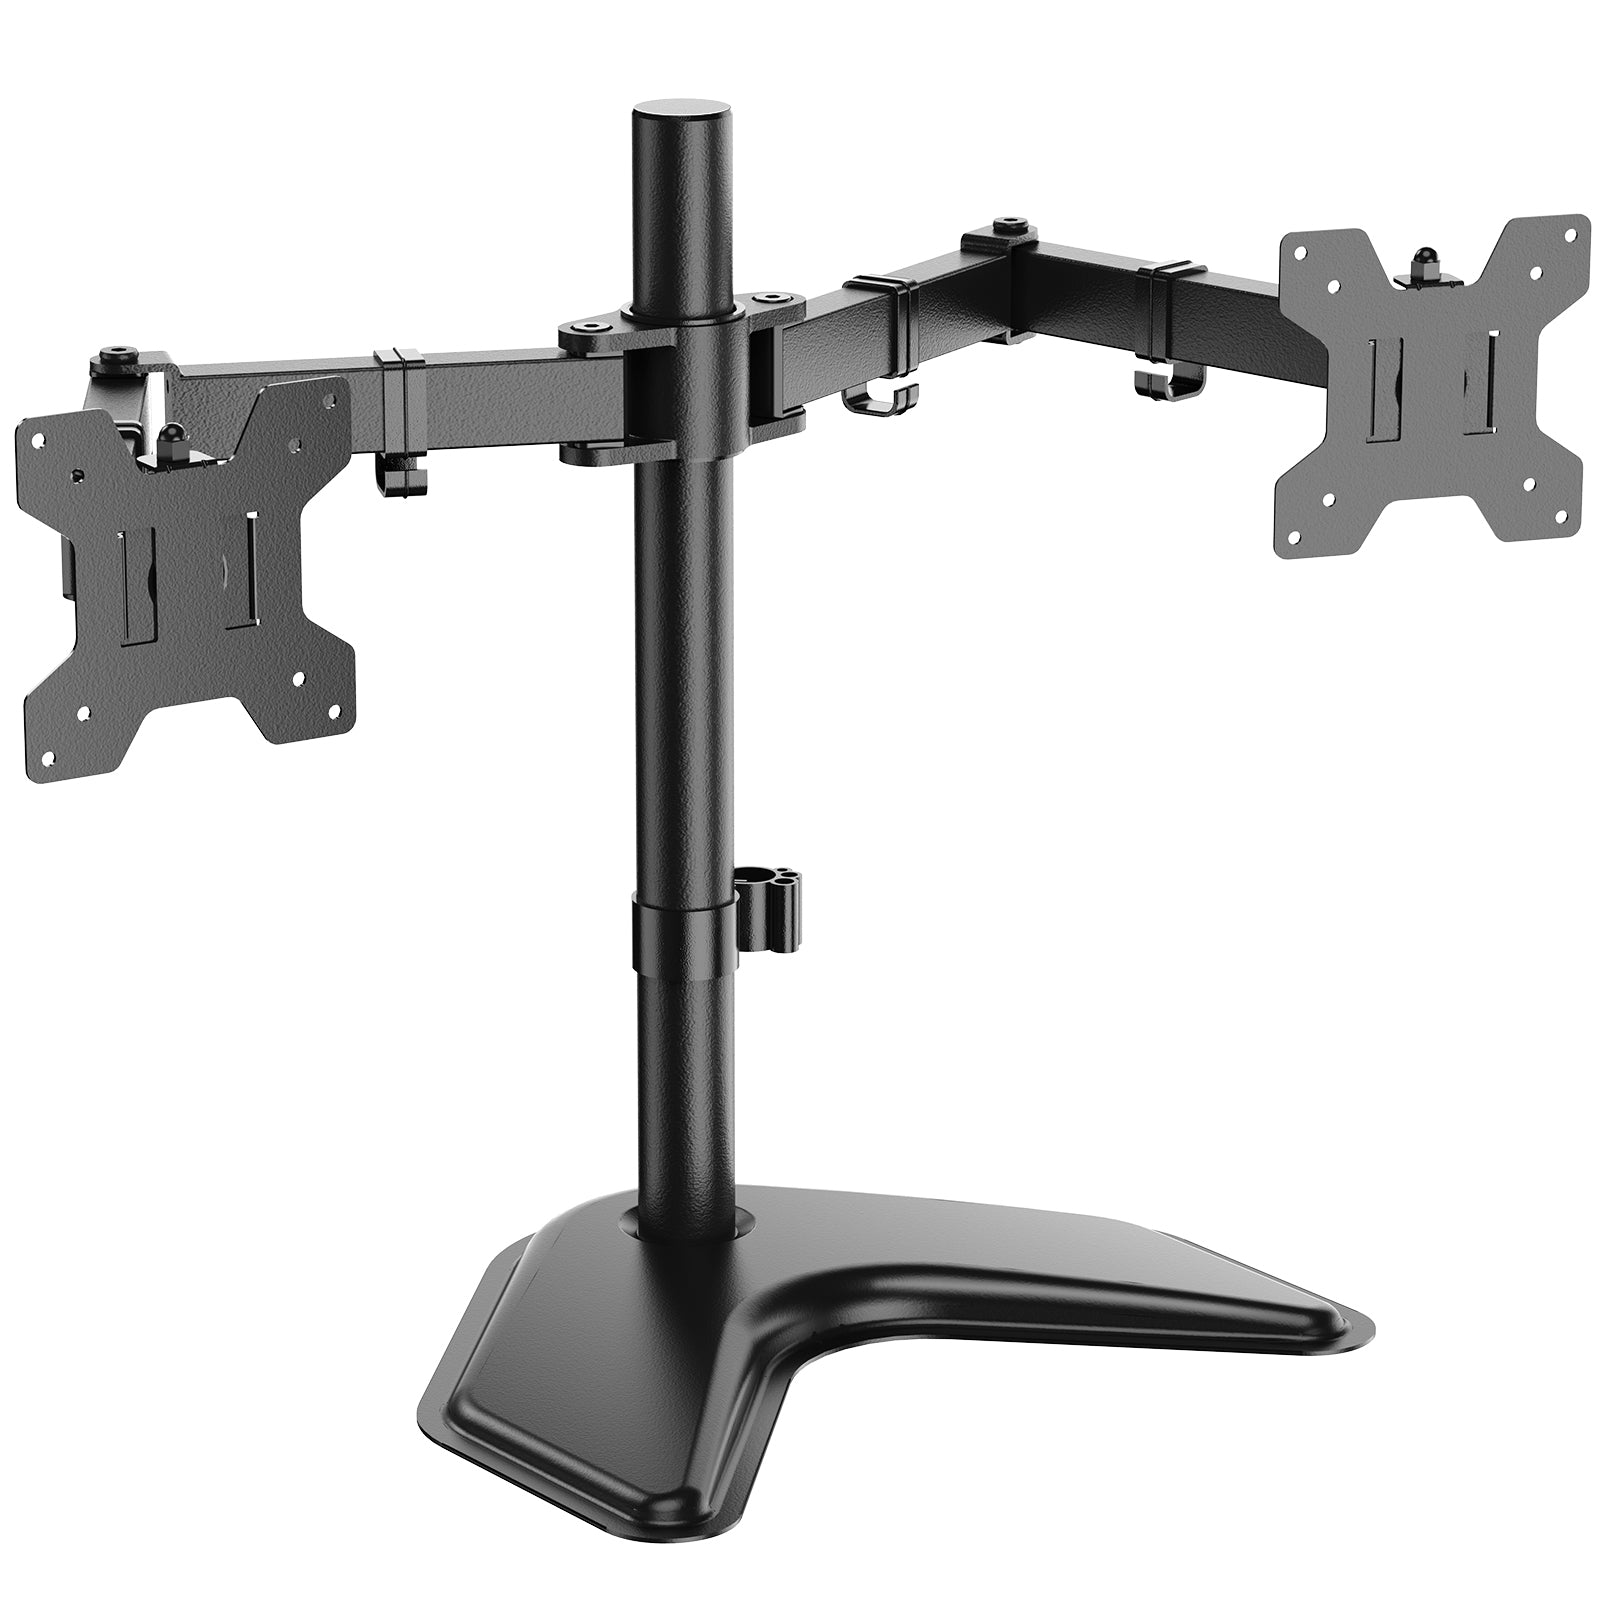 Dual Free-Standing LCD Monitor Stand Fits Screens up to 27 /22